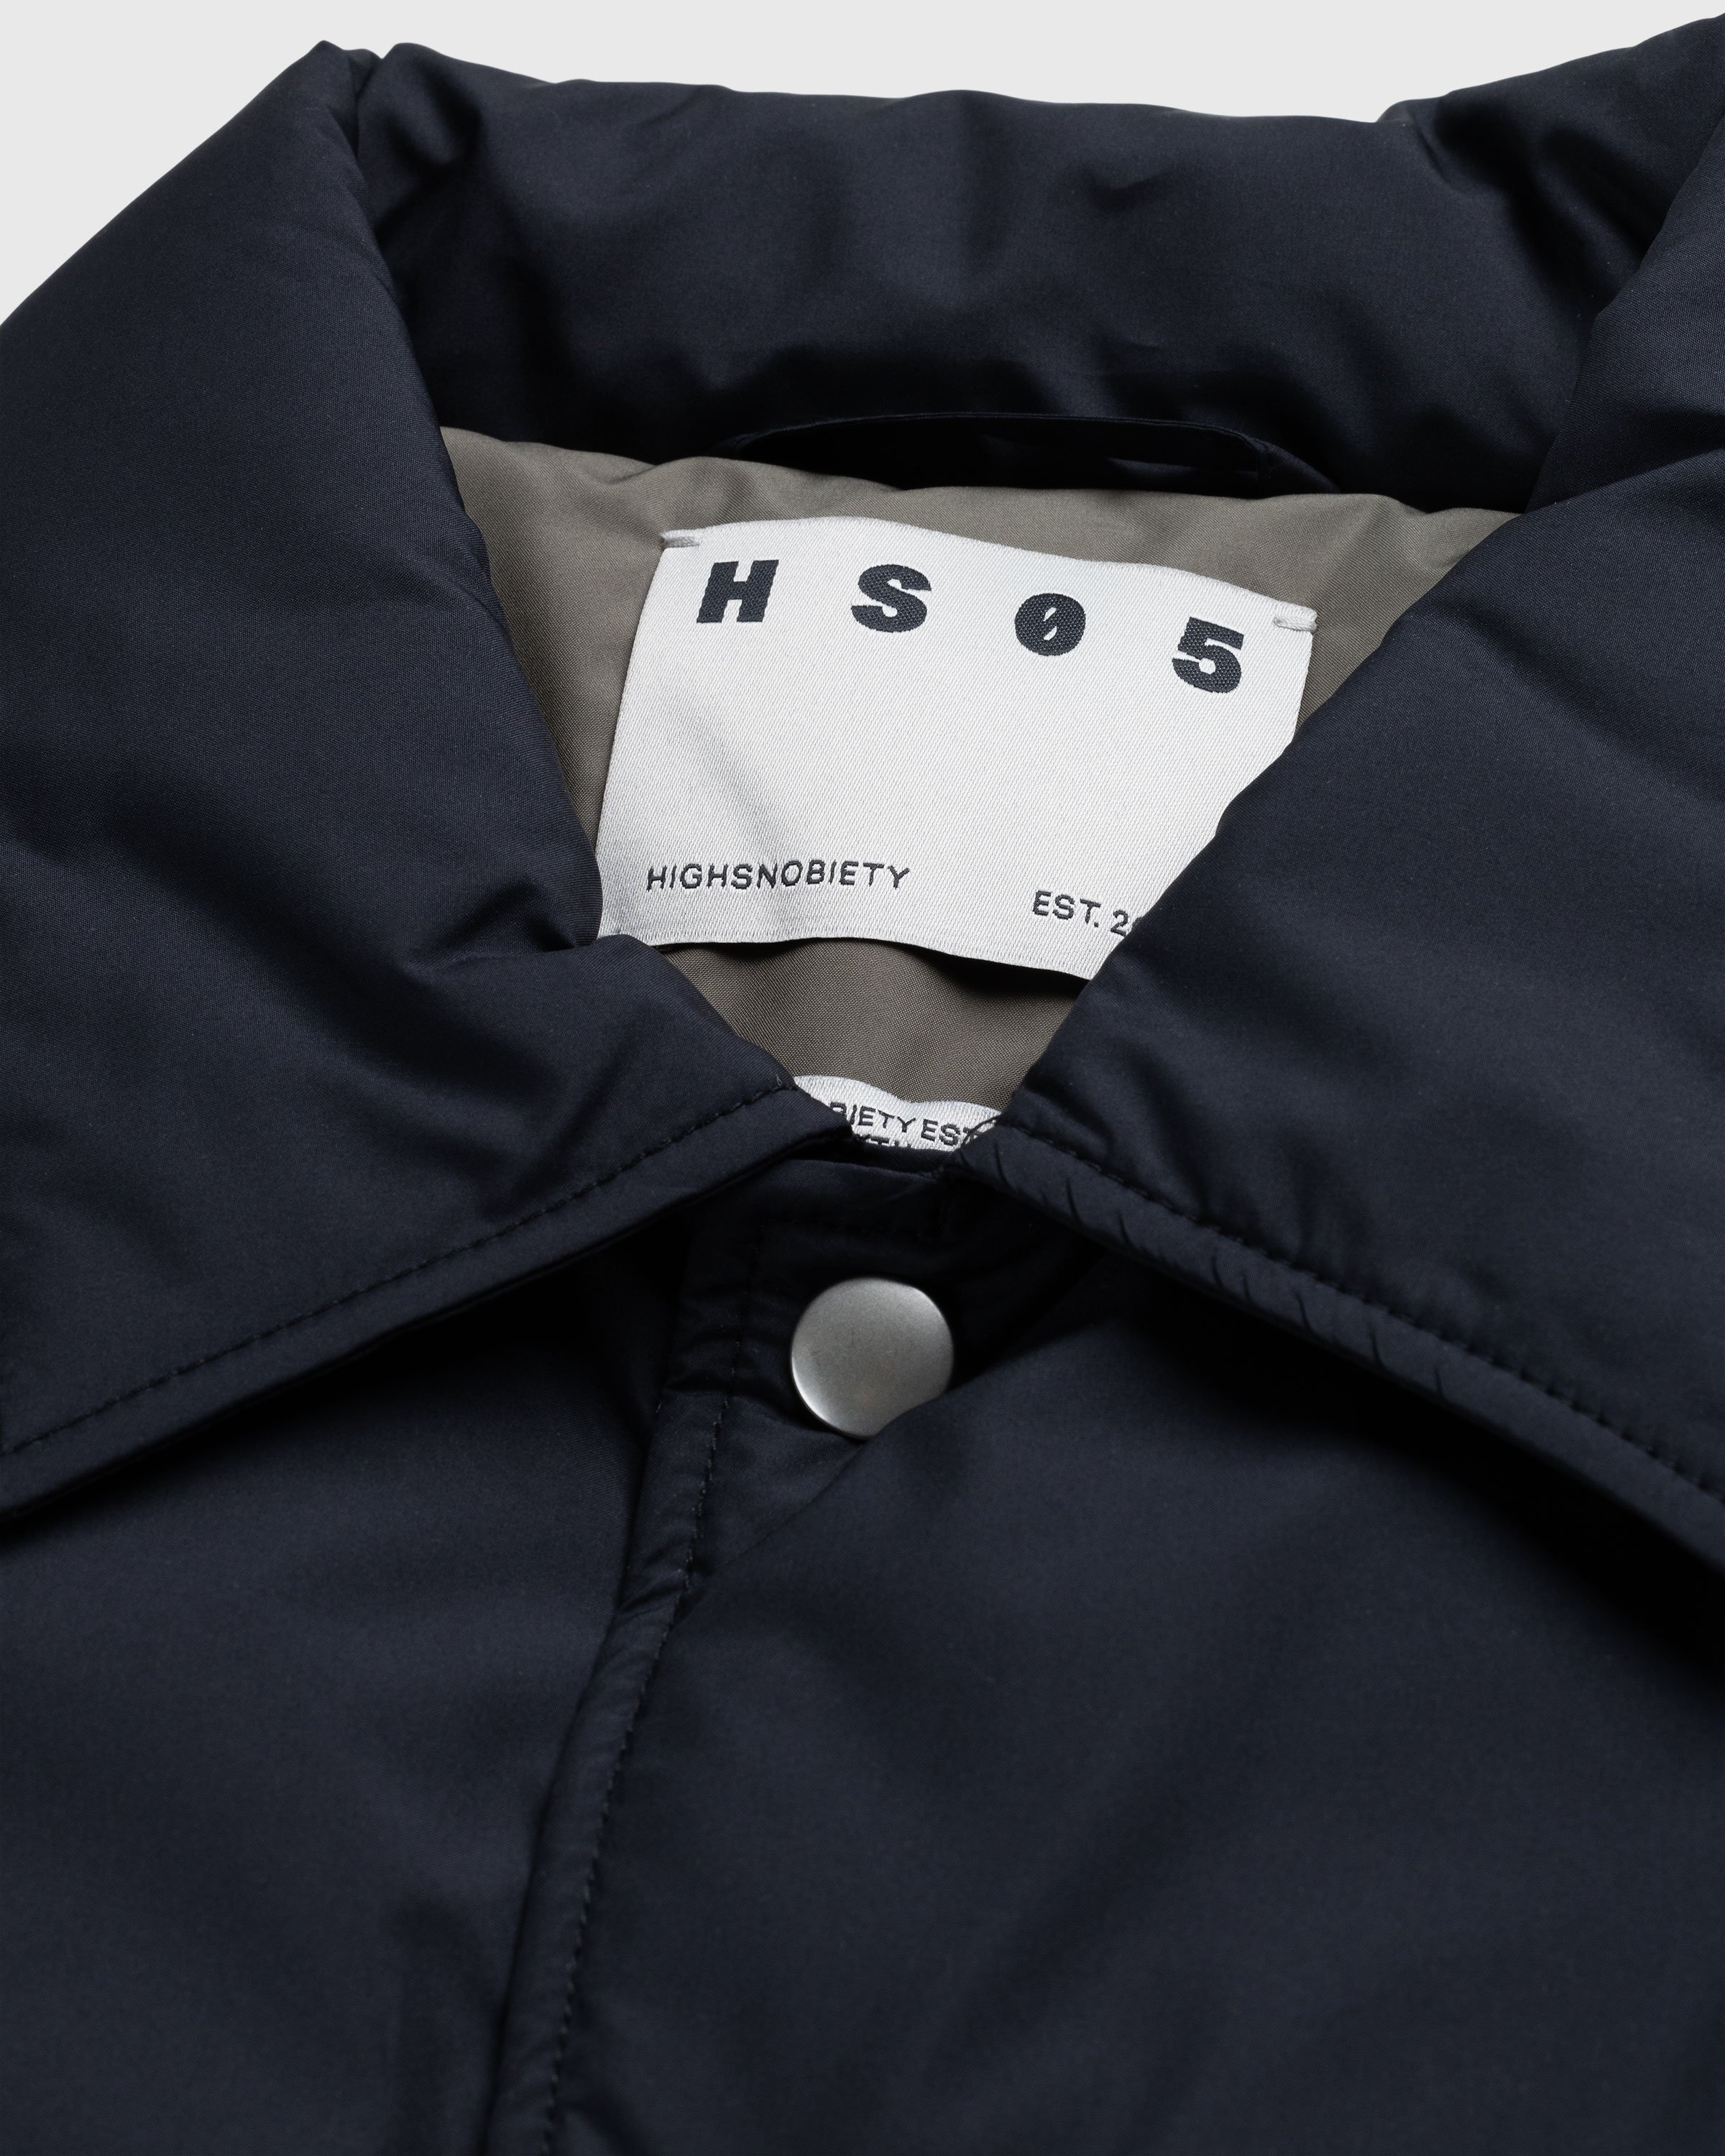 Highsnobiety HS05 – Light Insulated Eco-Poly Jacket Black - Outerwear - Black - Image 3